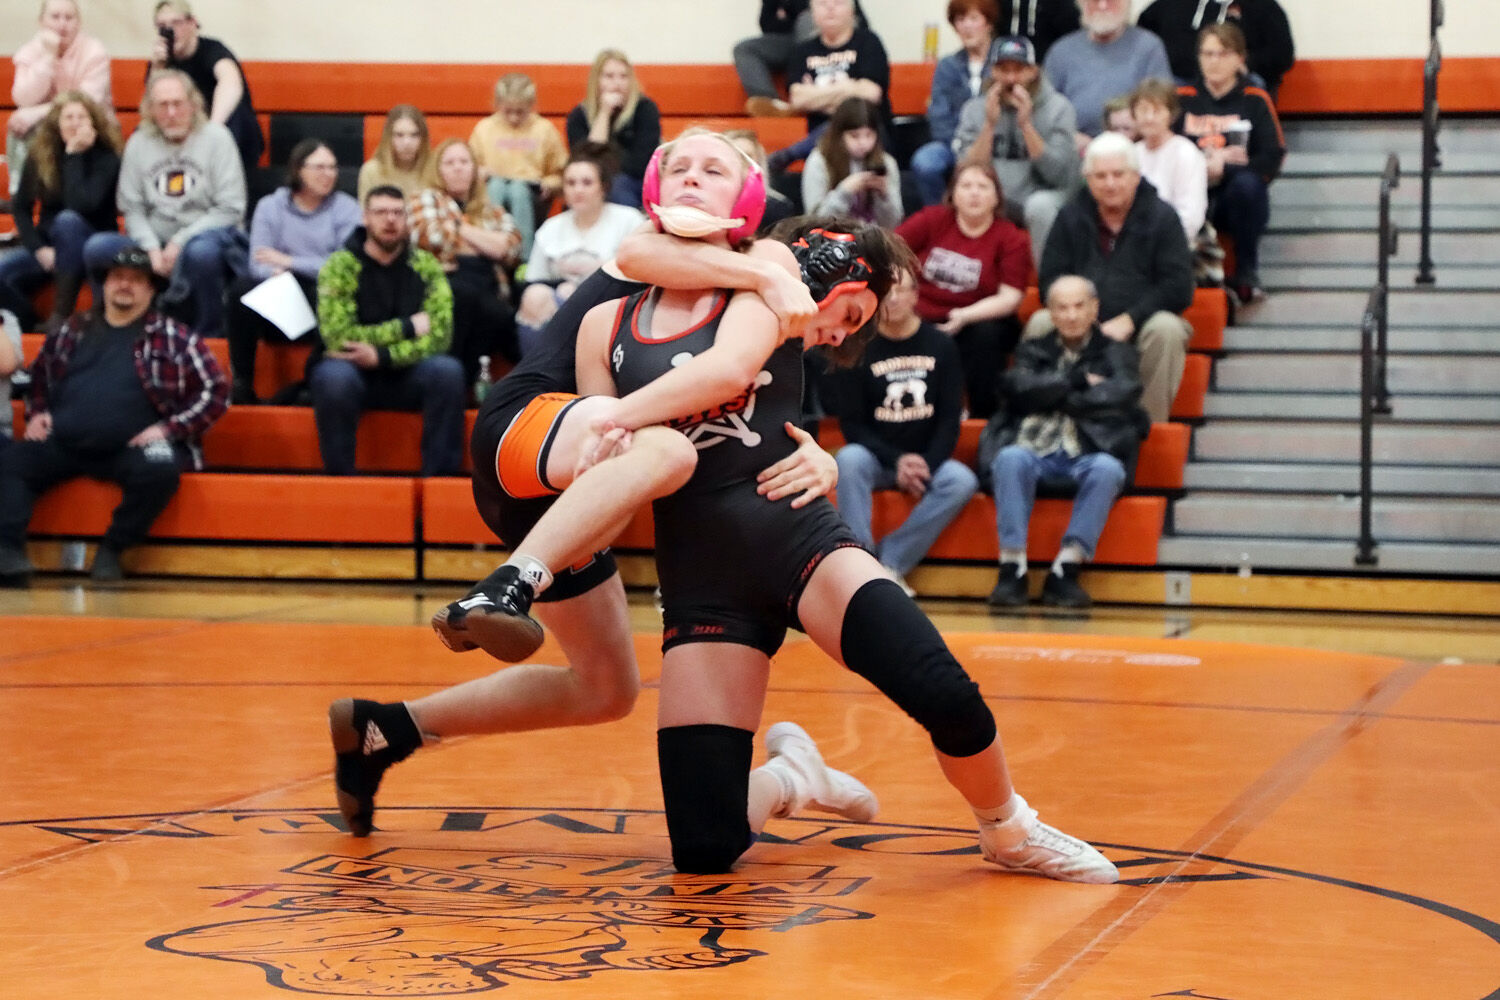 Benzie Central and Mancelona Set to Clash in Regional Wrestling Semifinals on Valentine’s Day